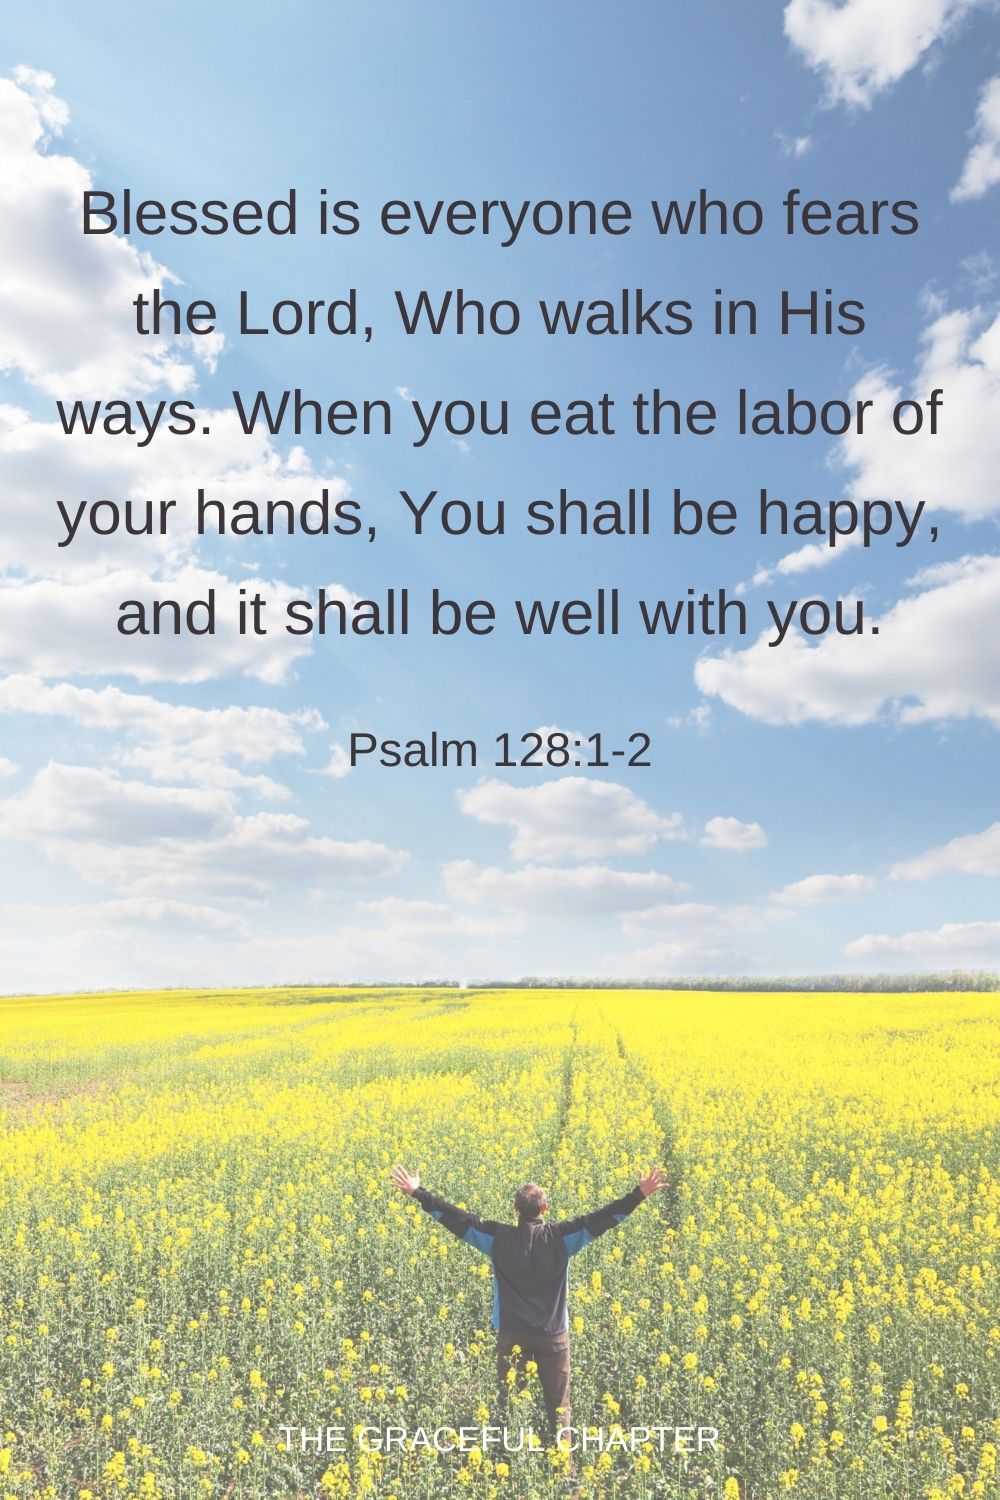 Blessed is every one who fears the Lord, Who walks in His ways. When you eat the labor of your hands, You shall be happy, and it shall be well with you. Psalm 128:1-2